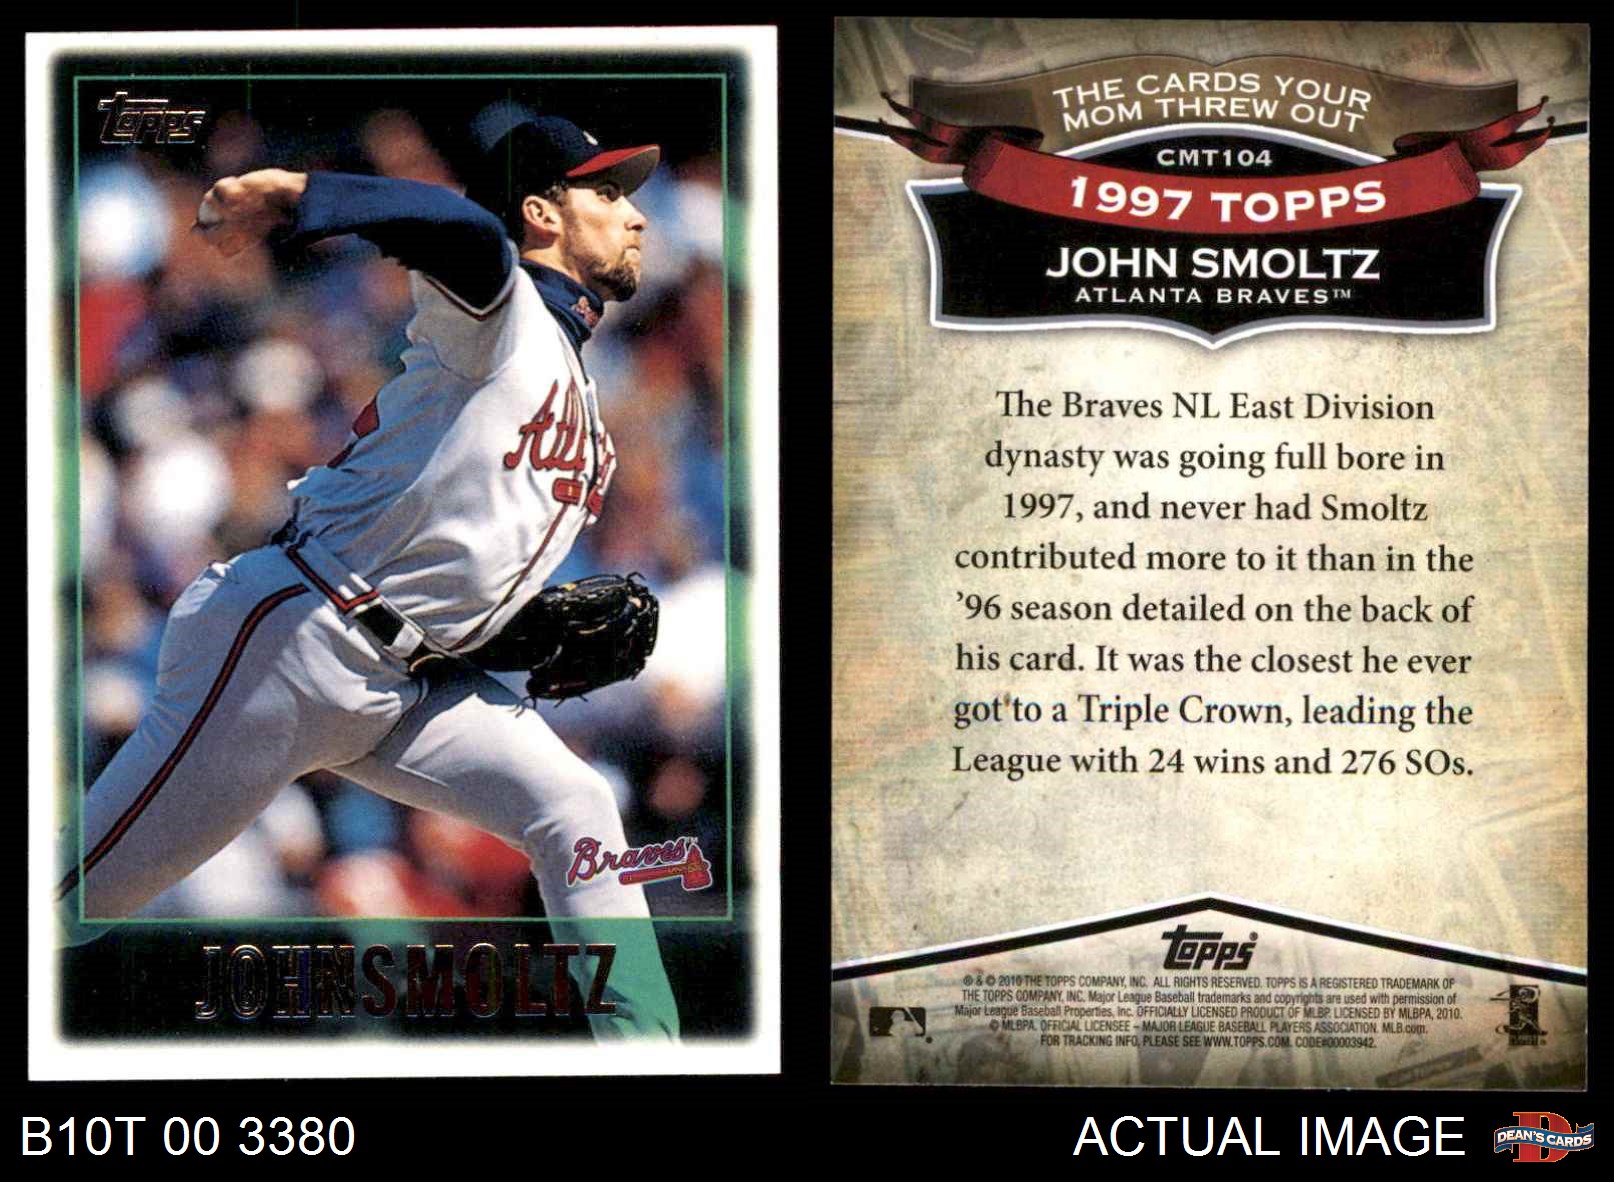 2010 Topps Cards Your Mom Threw Out #CMT-104 John Smoltz Baseball Card 